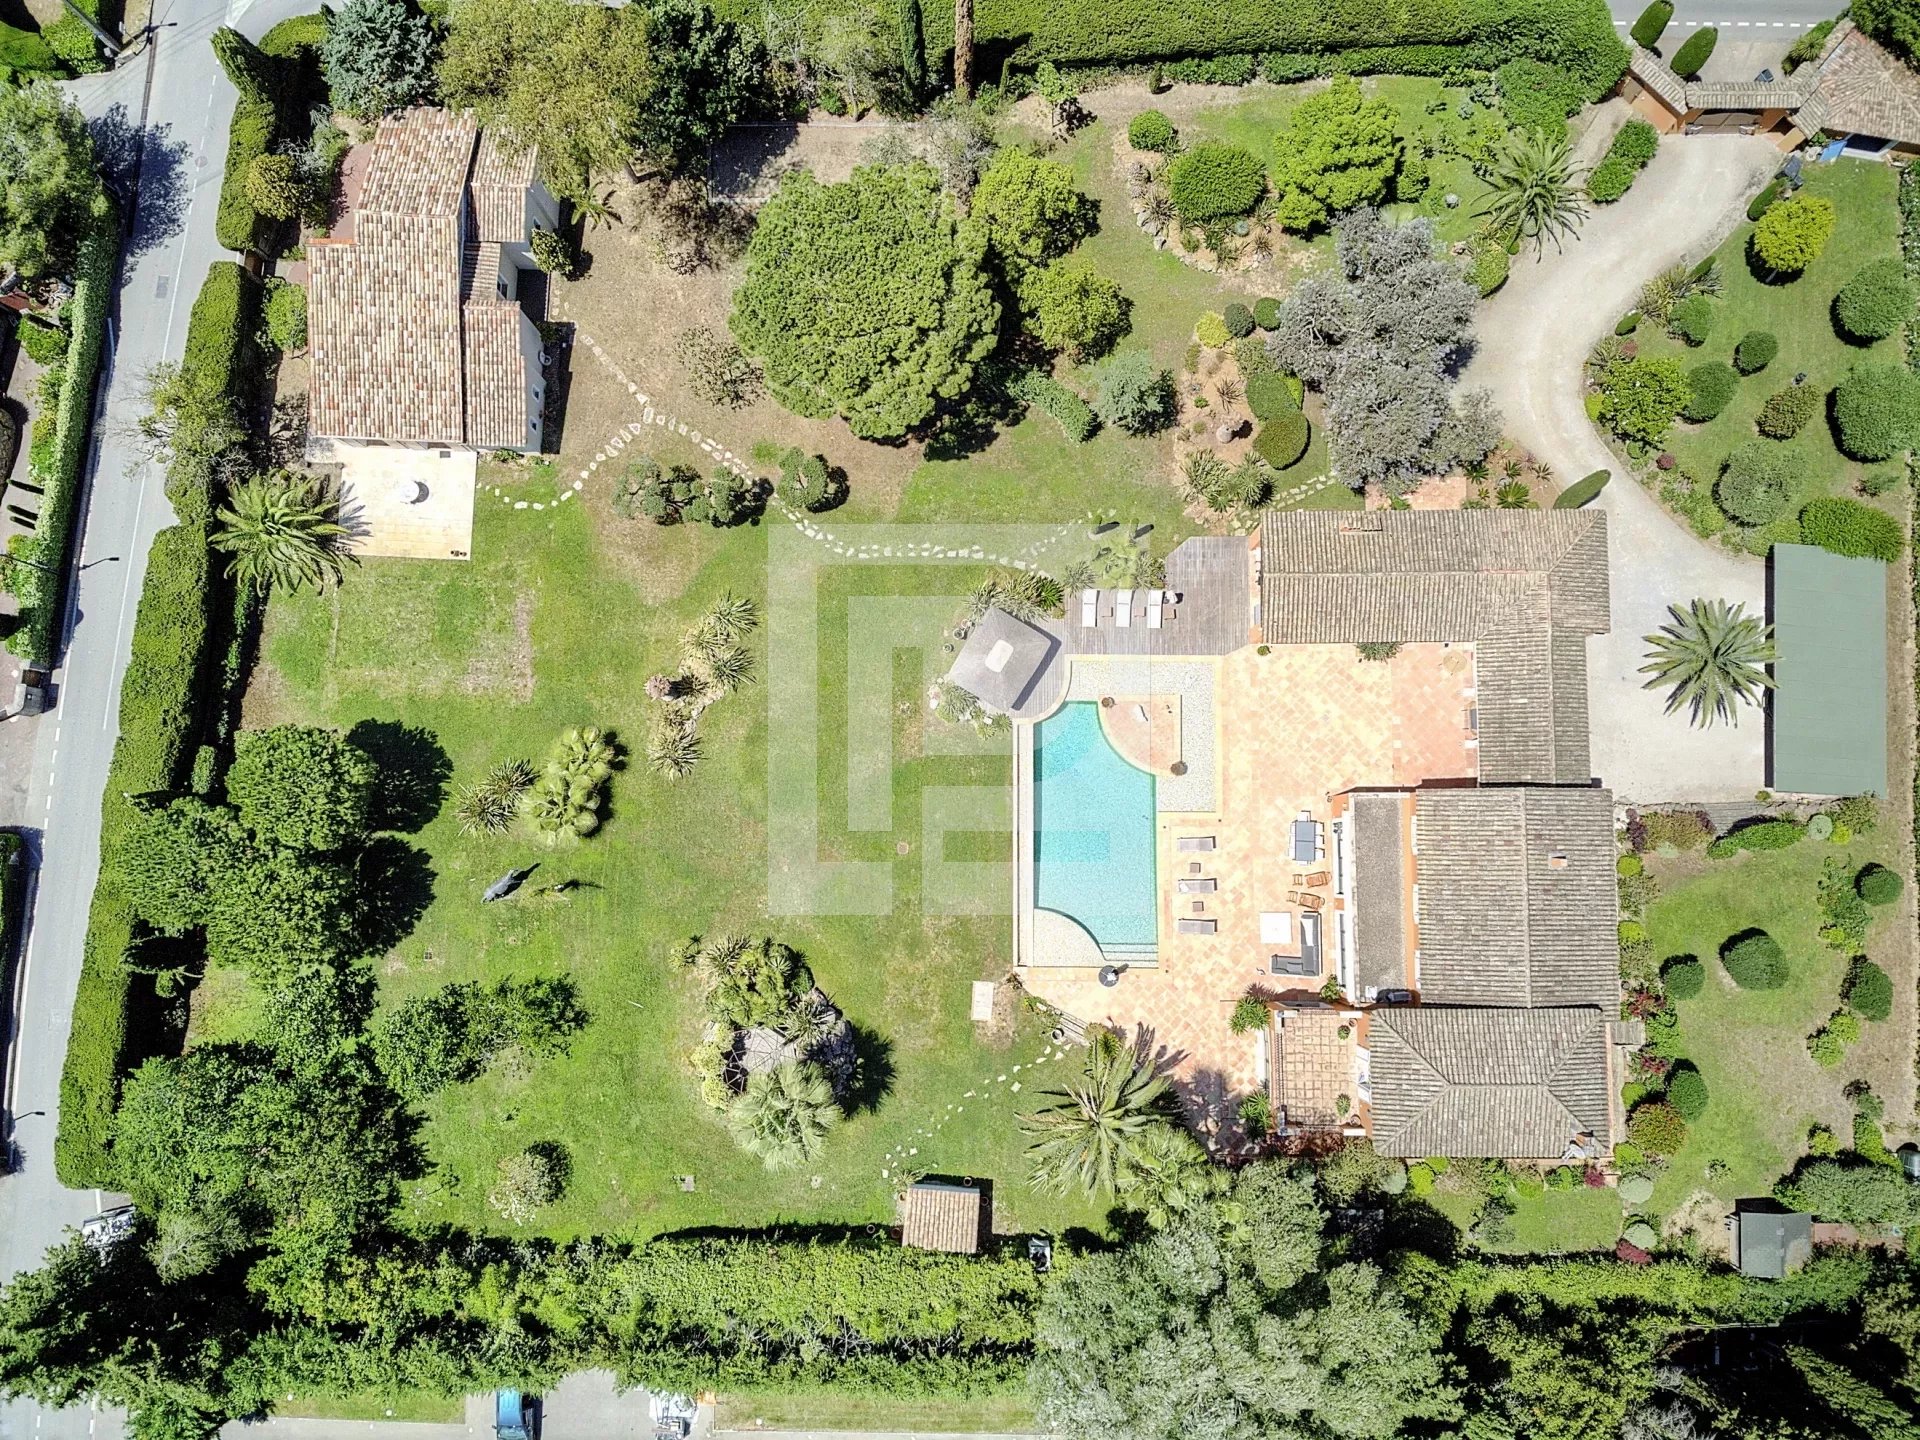 Magnificent property in the heart of one of the most sought-after areas of Mougins